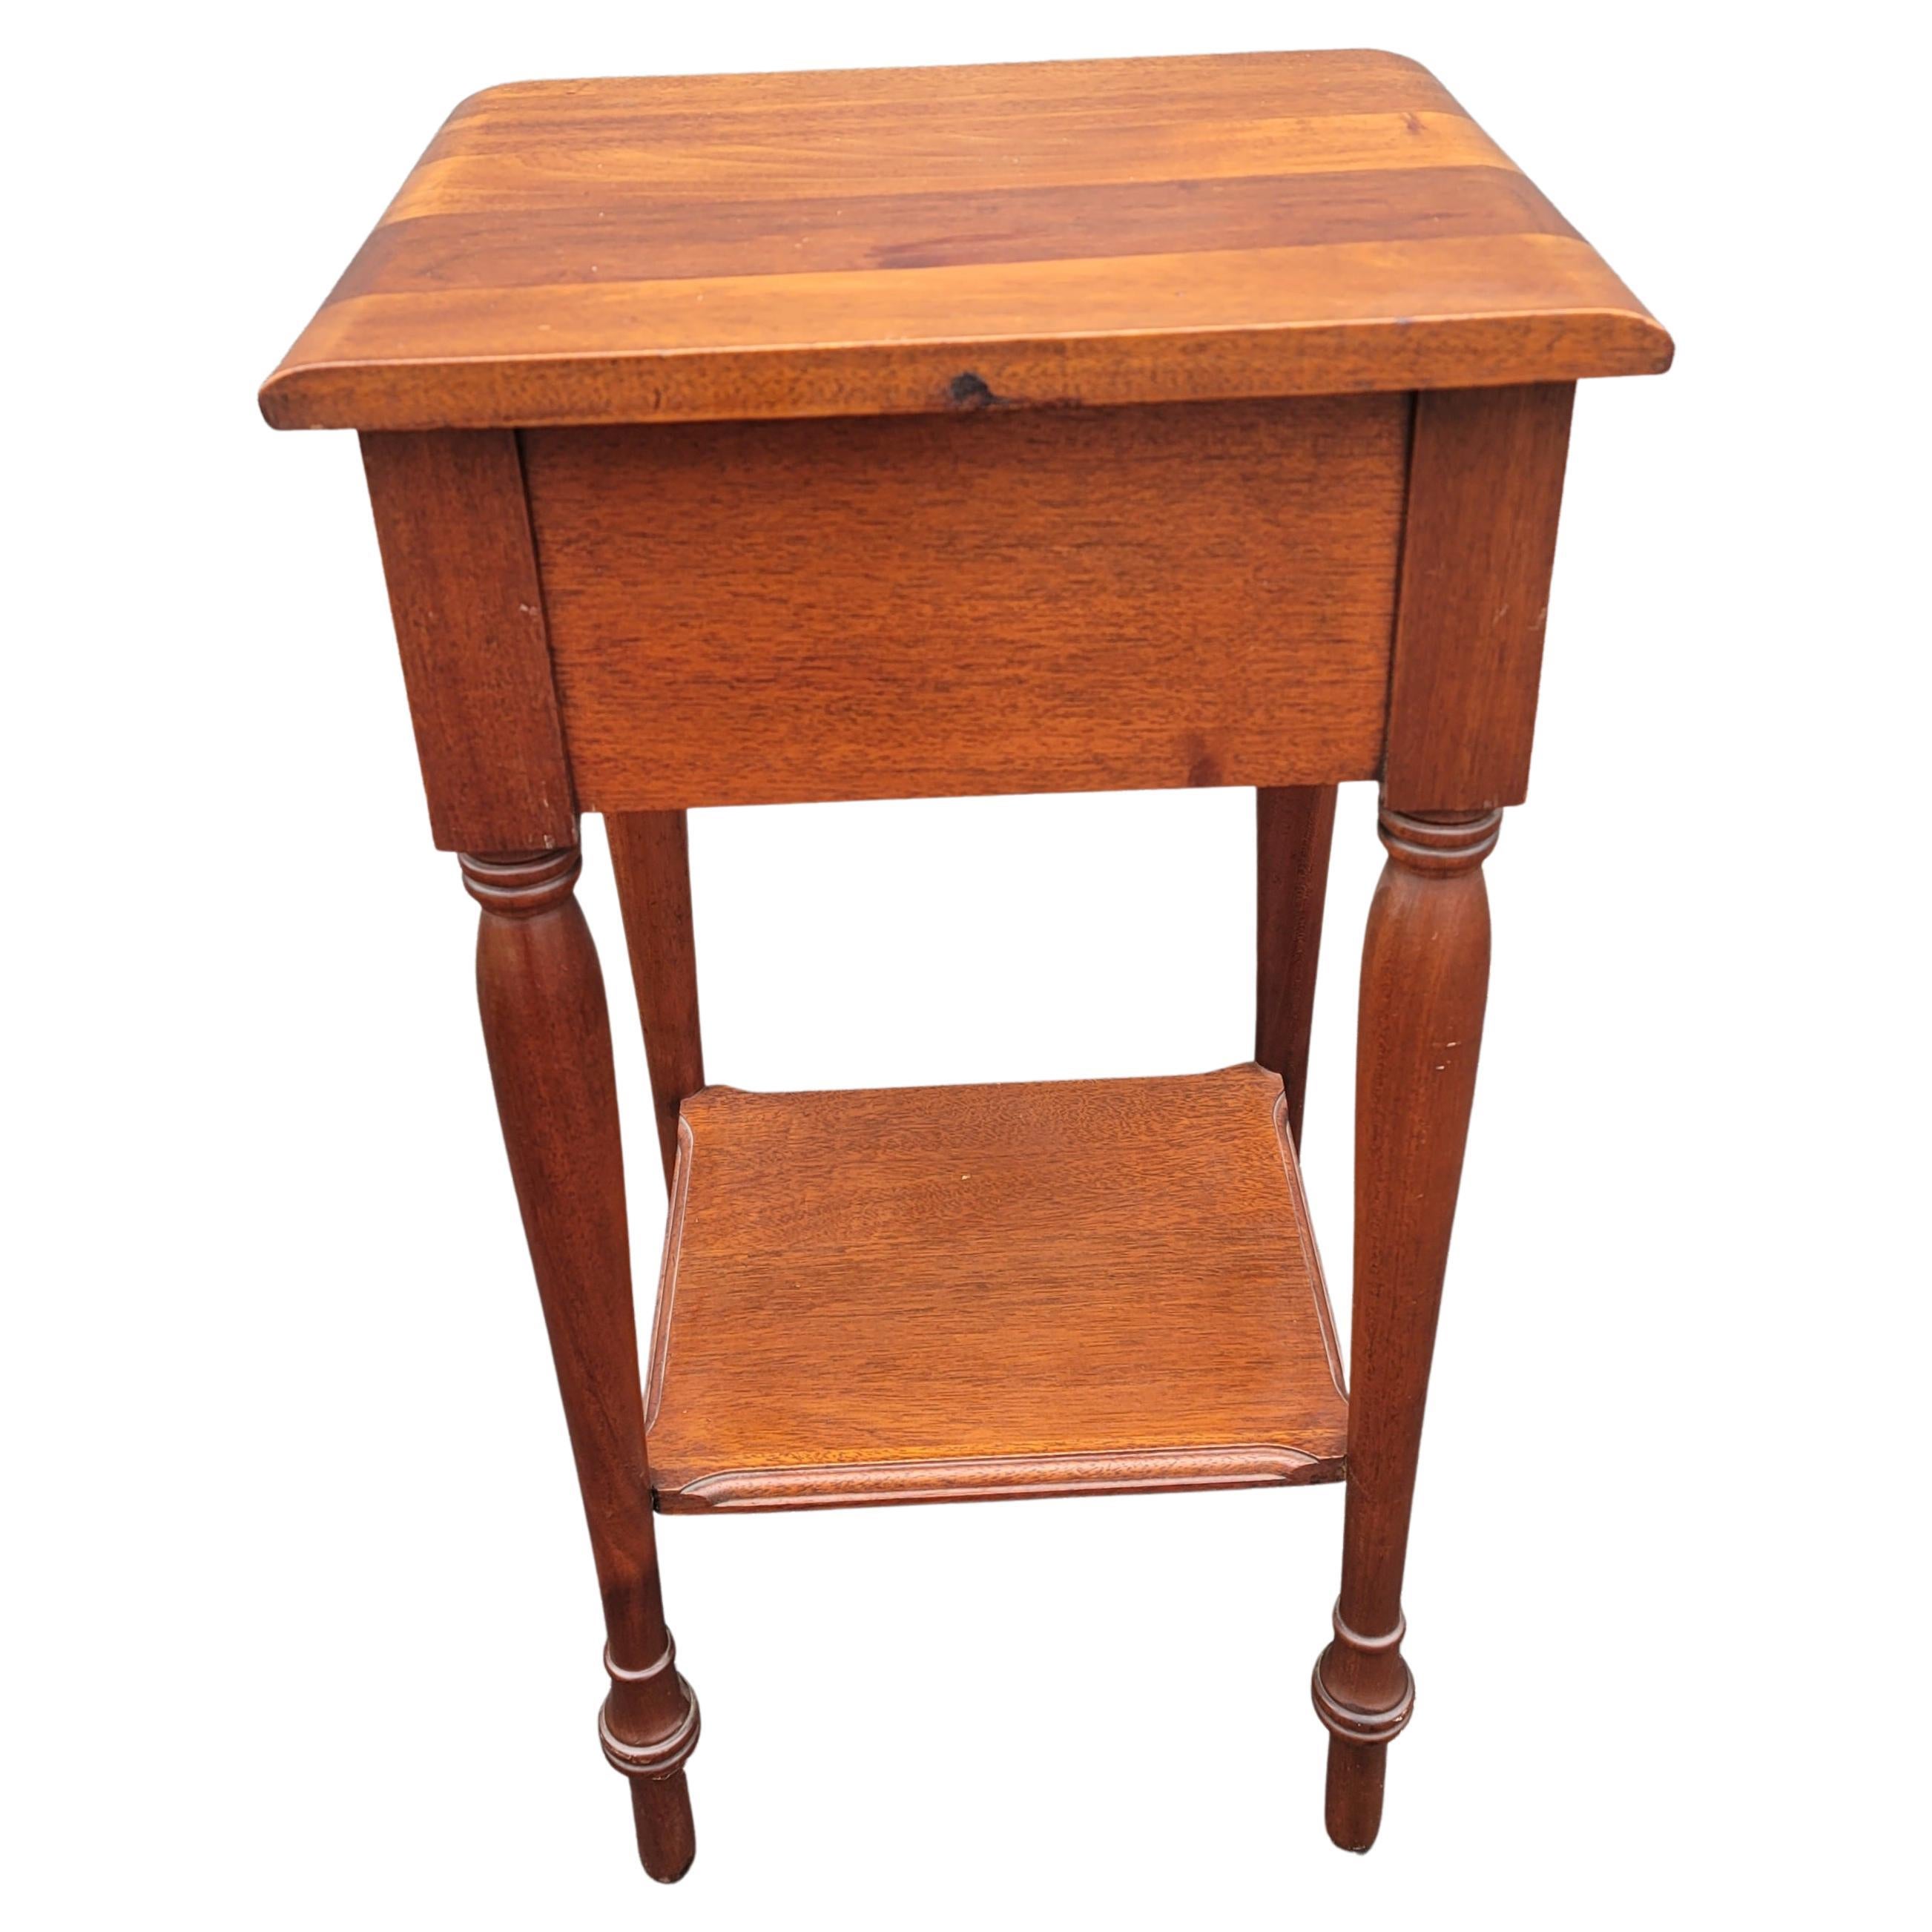 1960s Refinished Kling Factories Two Tier Solid Mahogany Side Table In Good Condition For Sale In Germantown, MD